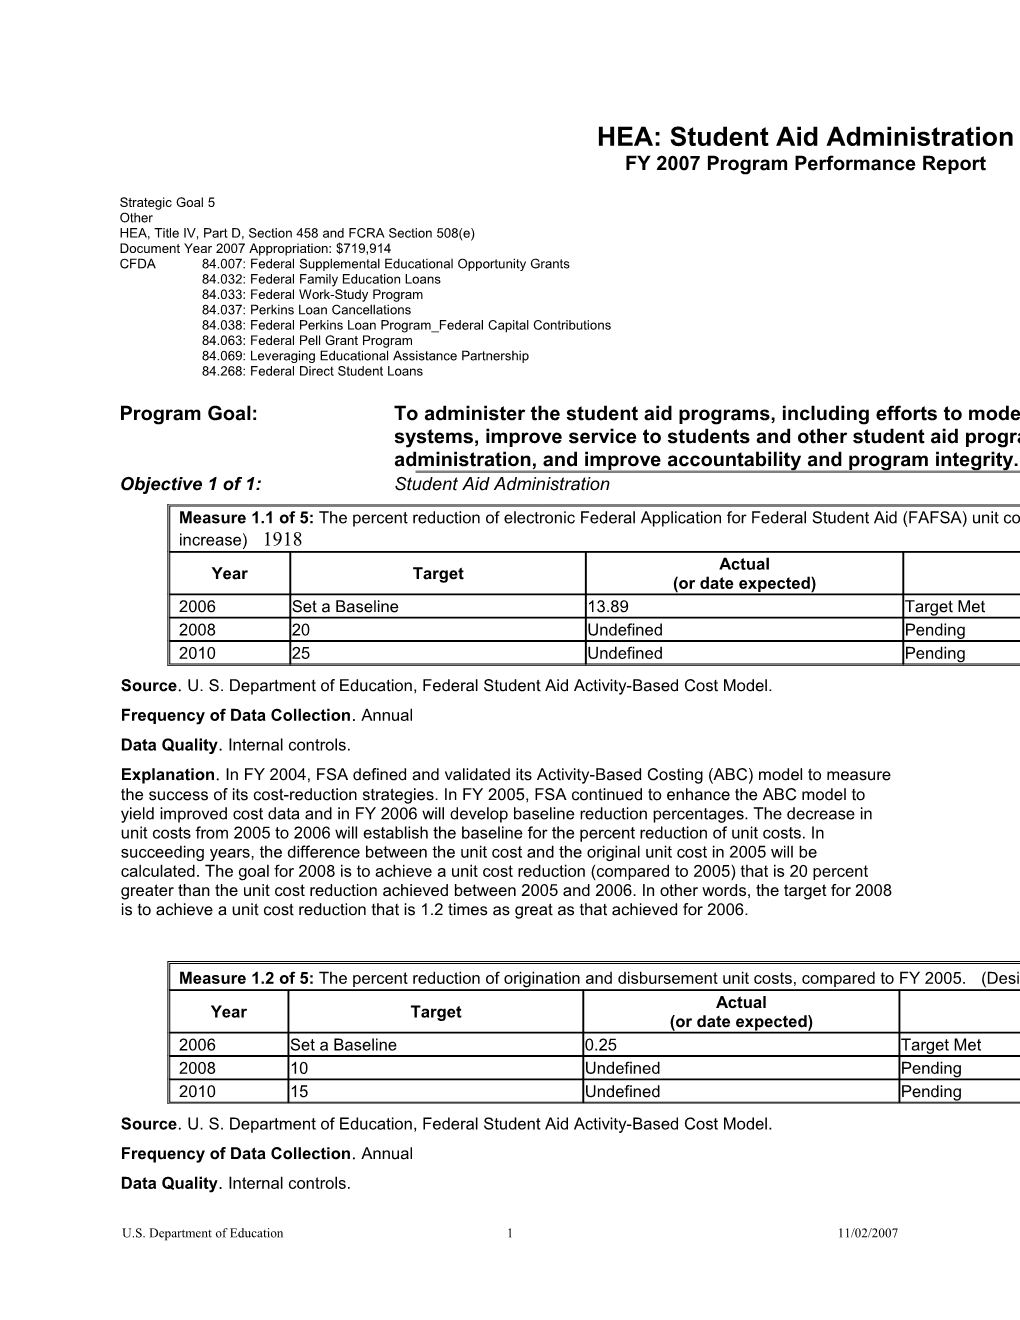 Student Aid Administration FY 2007 Program Performance Report (MS Word)